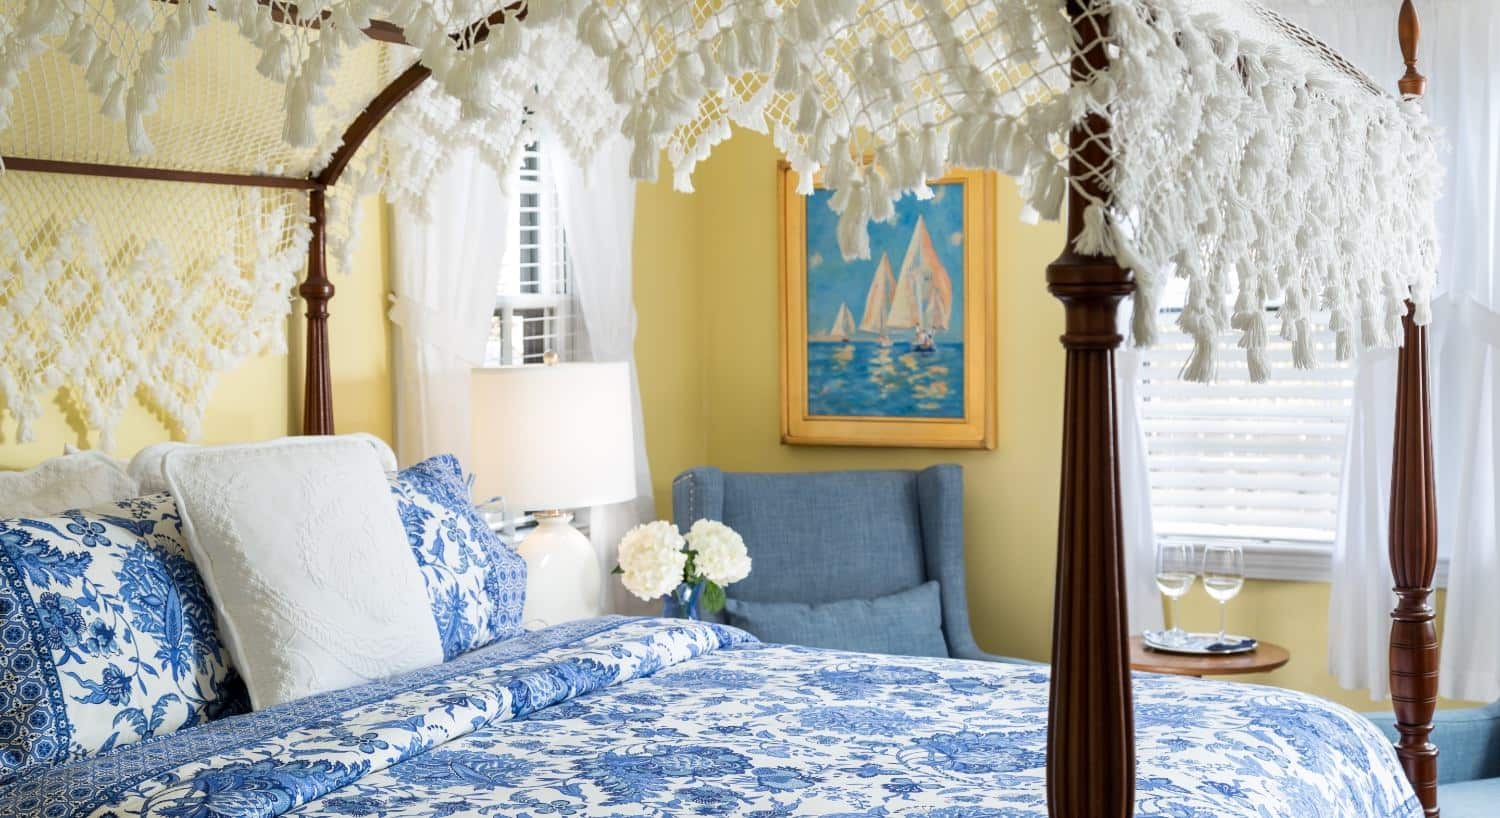 Bedroom with yellow walls, dark wooden four-poster bed, blue and white paisley bedding, denim upholstered arm chairs